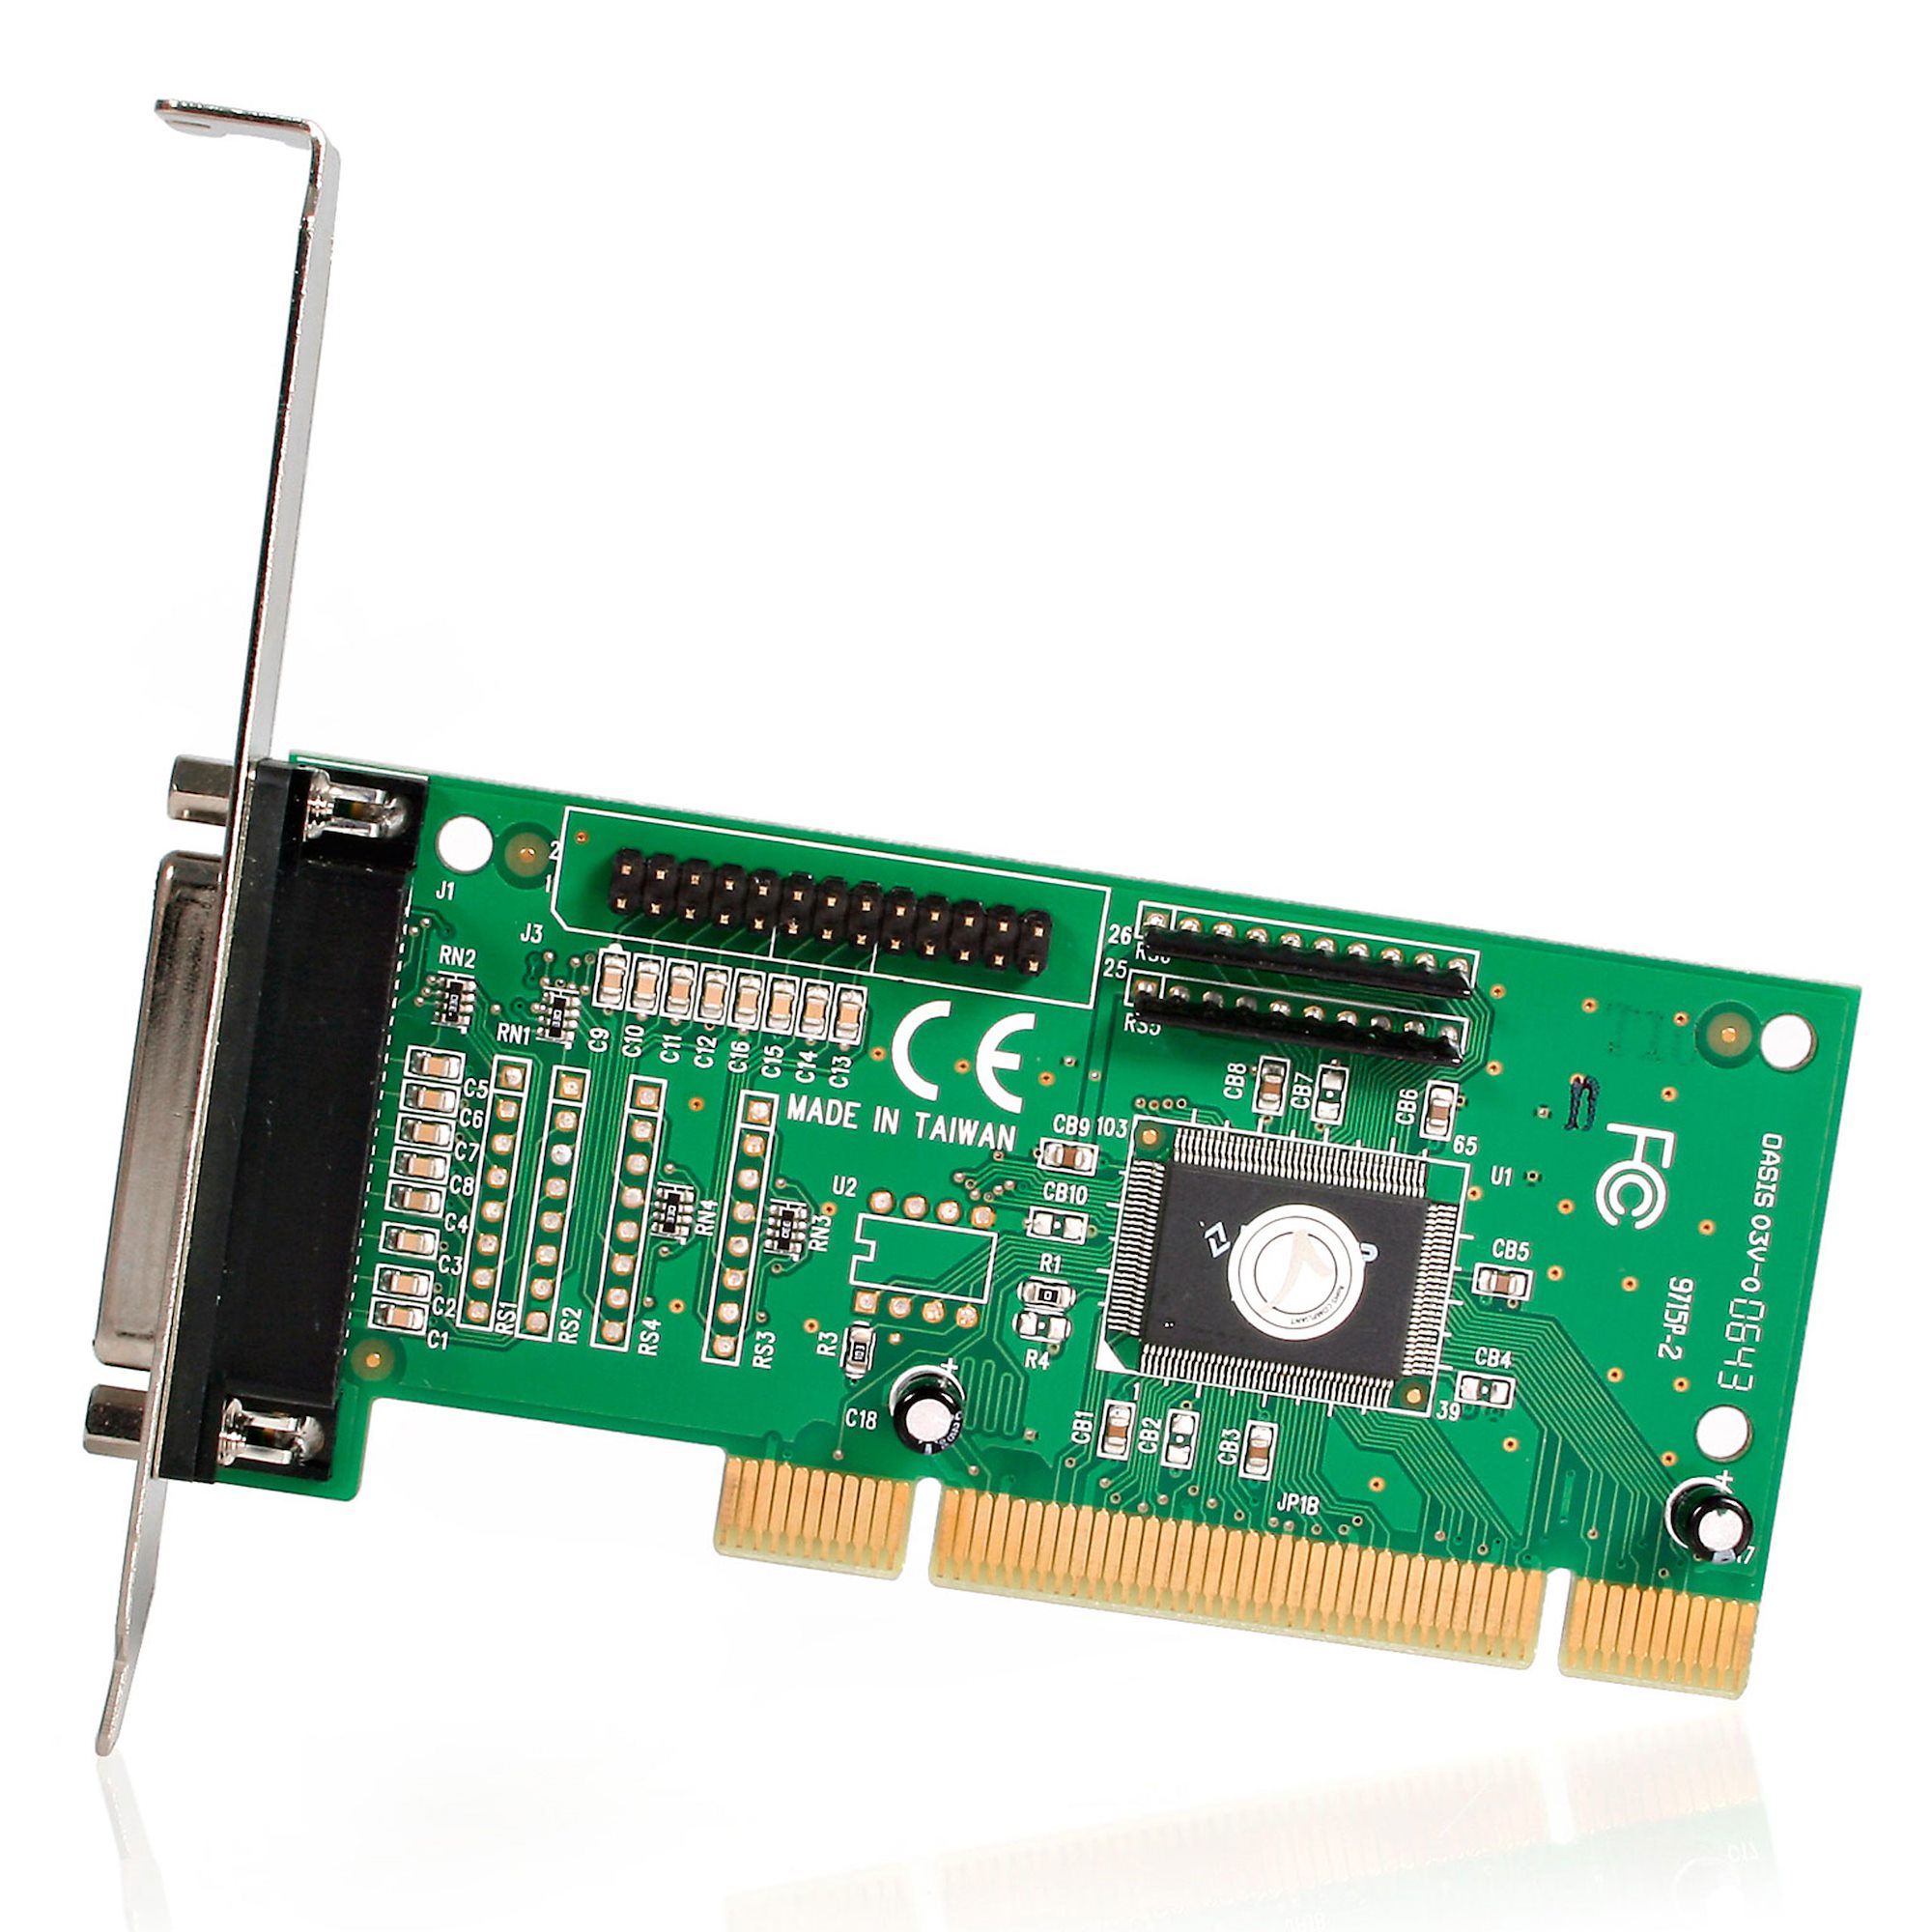 2 Port PCI Parallel Adapter Card - Parallel Cards u0026 Adapters | Add-on Cards  u0026 Peripherals | StarTech.com